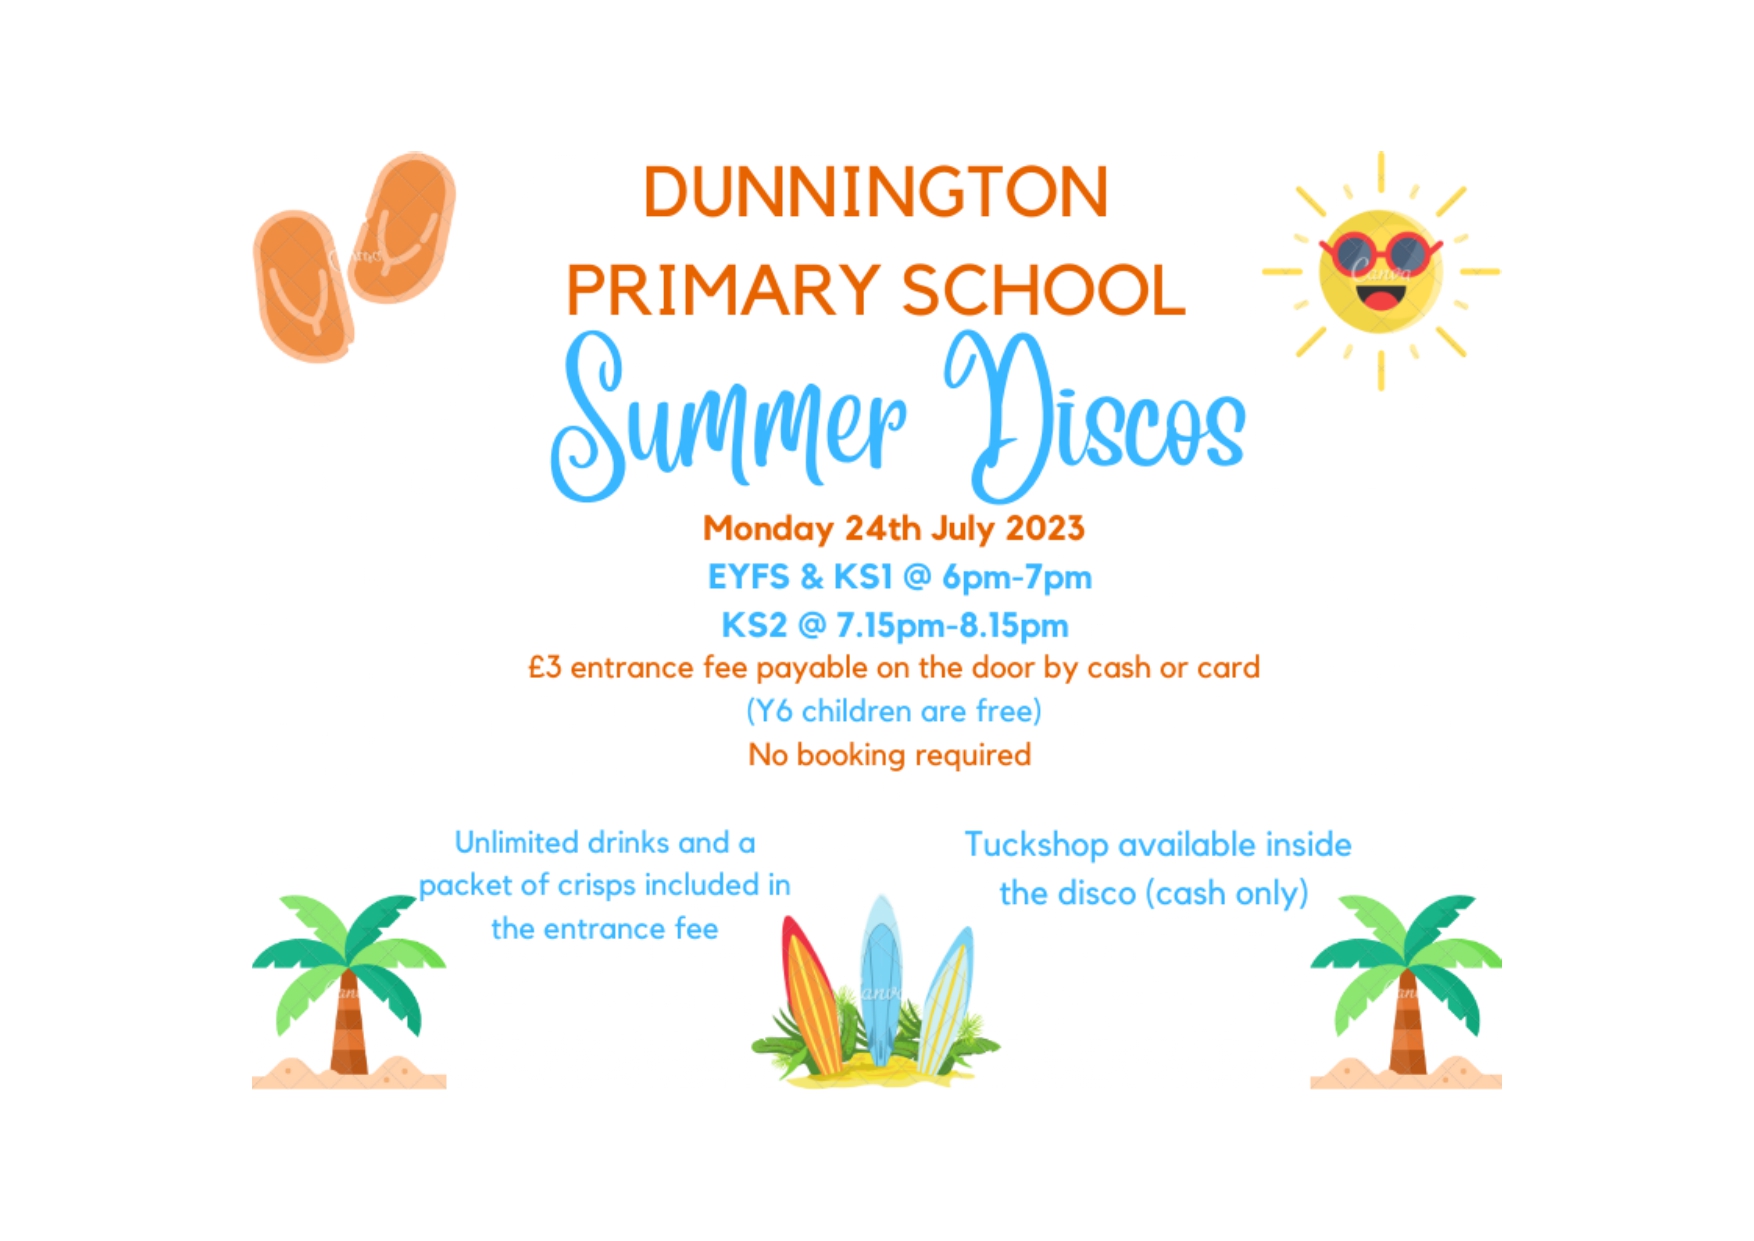 Dunnington Primary School Summer Discos. Monday 24th July 2023: EYFS & KS1 @6pm-7pm; KS2 @ 7.15pm-8.15pm. £3 Entrance fee payable on the door by cash or card (Y6 children are free). No booking required. Unlimited drinks and a packet of crisps included in the entrance fee. Tuckshop available inside (cash only)